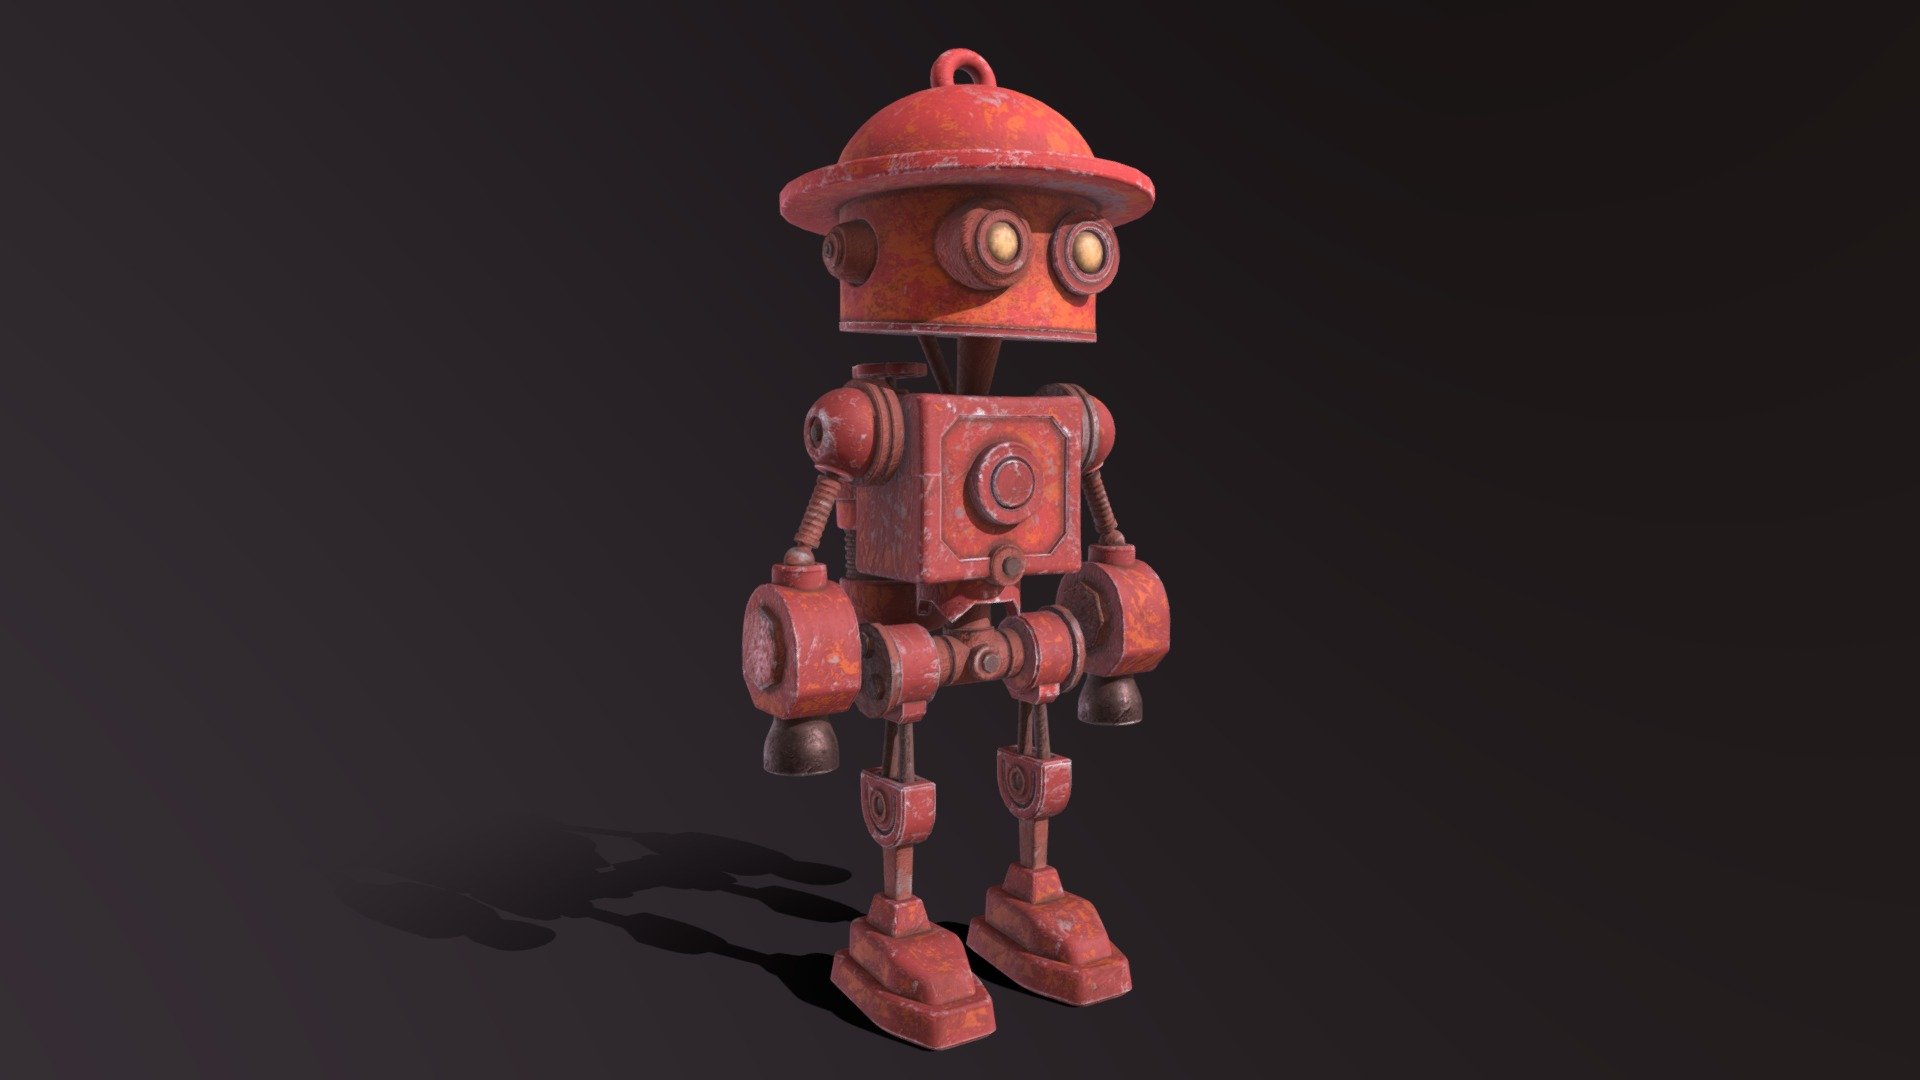 Clank McSparkface isn't the sharpest tool in the shed, but his heart is bigger than his fire extinguisher. Though his gears groan with every move, Clank charge towards any blaze with the enthusiasm of a well-oiled rookie.

Stylized Cartoony Rusty Fireman Robot game character made in 3ds Max 2023 and textured/handpainted in Adobe Substance Painter. Model has 22834 polygons and 22138 vertices. 

As usual: best wishes &amp; have a great day! - Stylized Cartoony Rusty Fireman Robot - 3D model by Art-Teeves 3d model